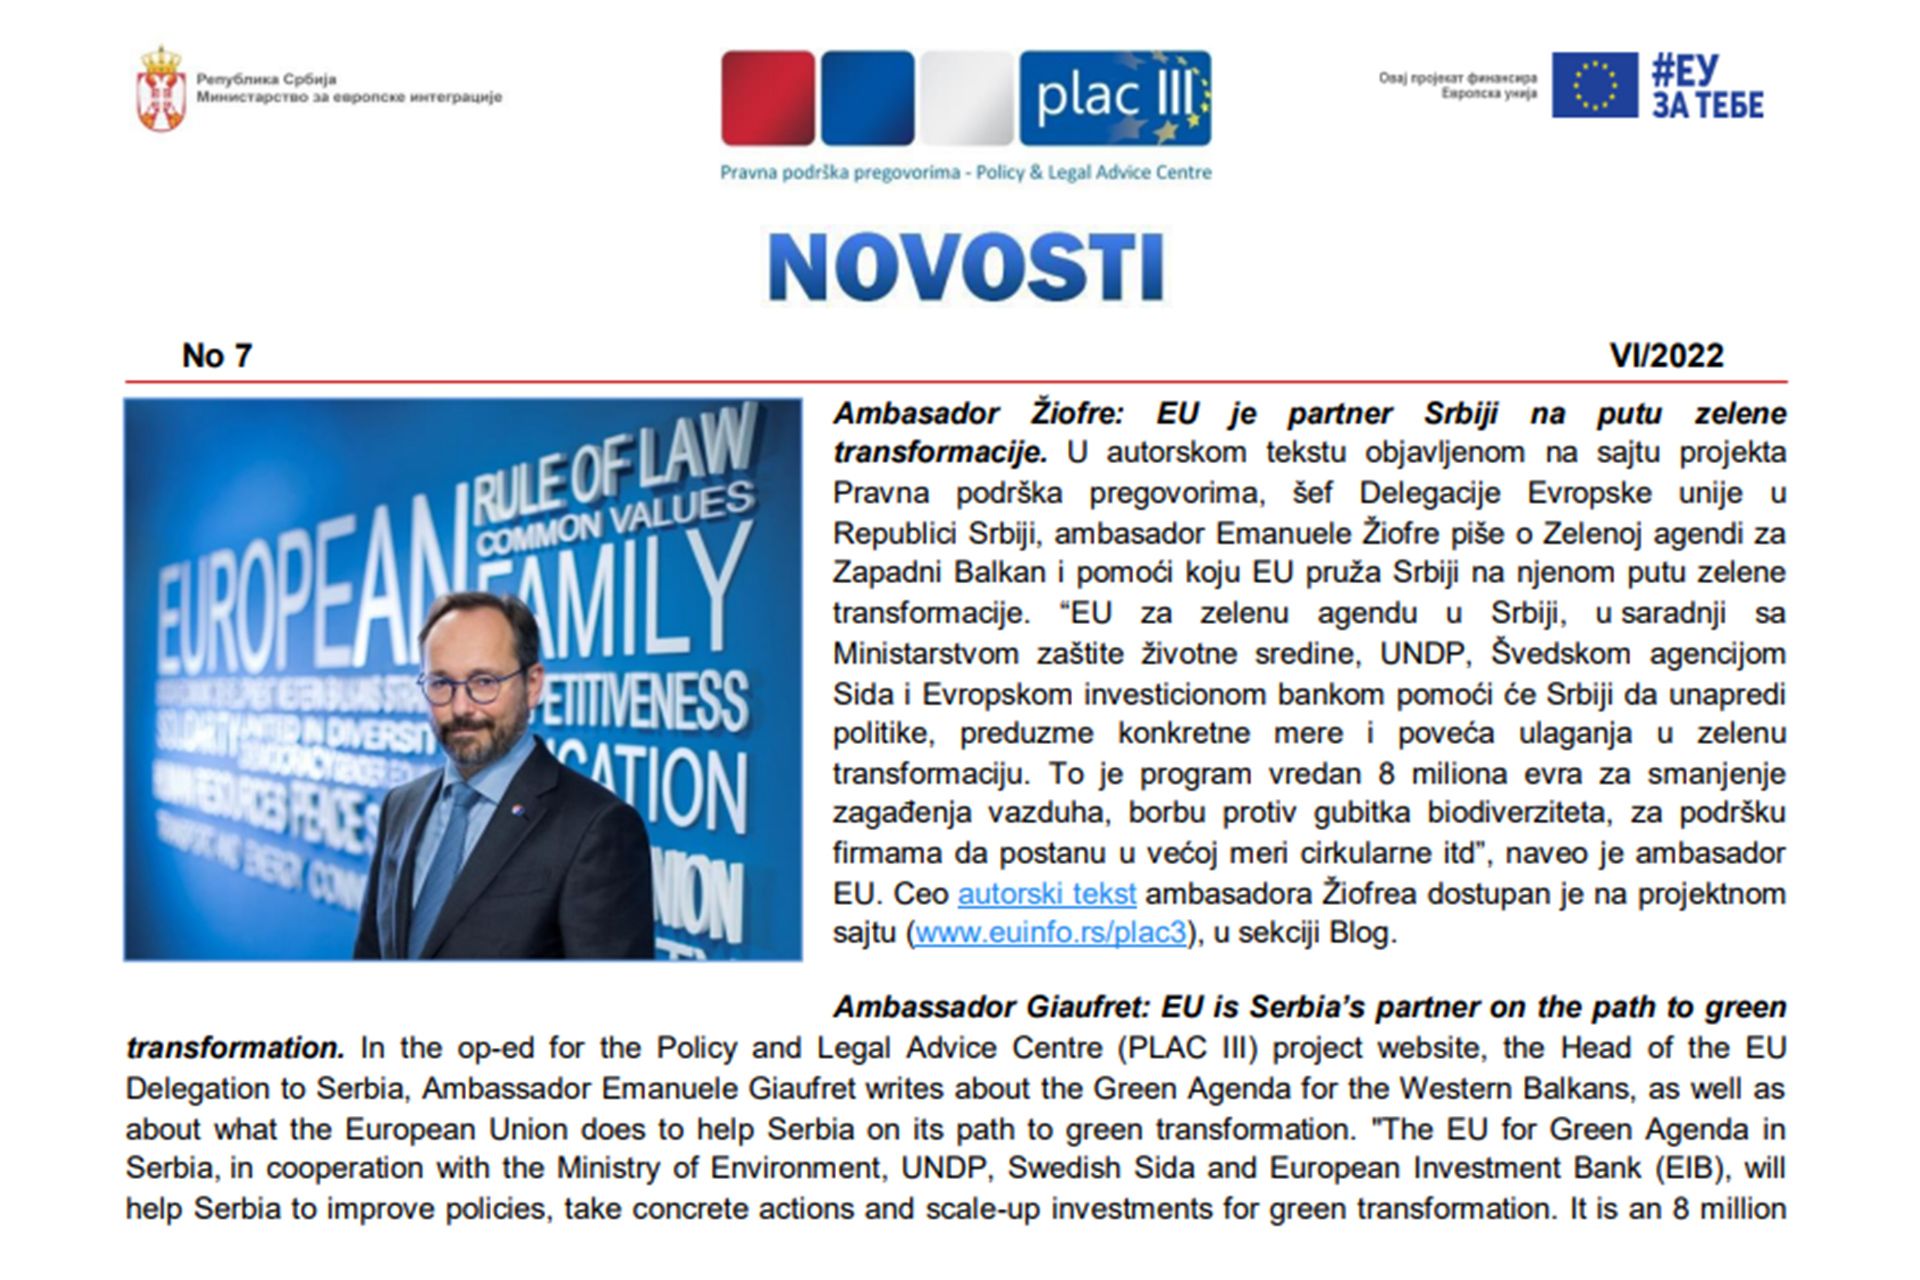 The seventh issue of PLAC III Newsletter